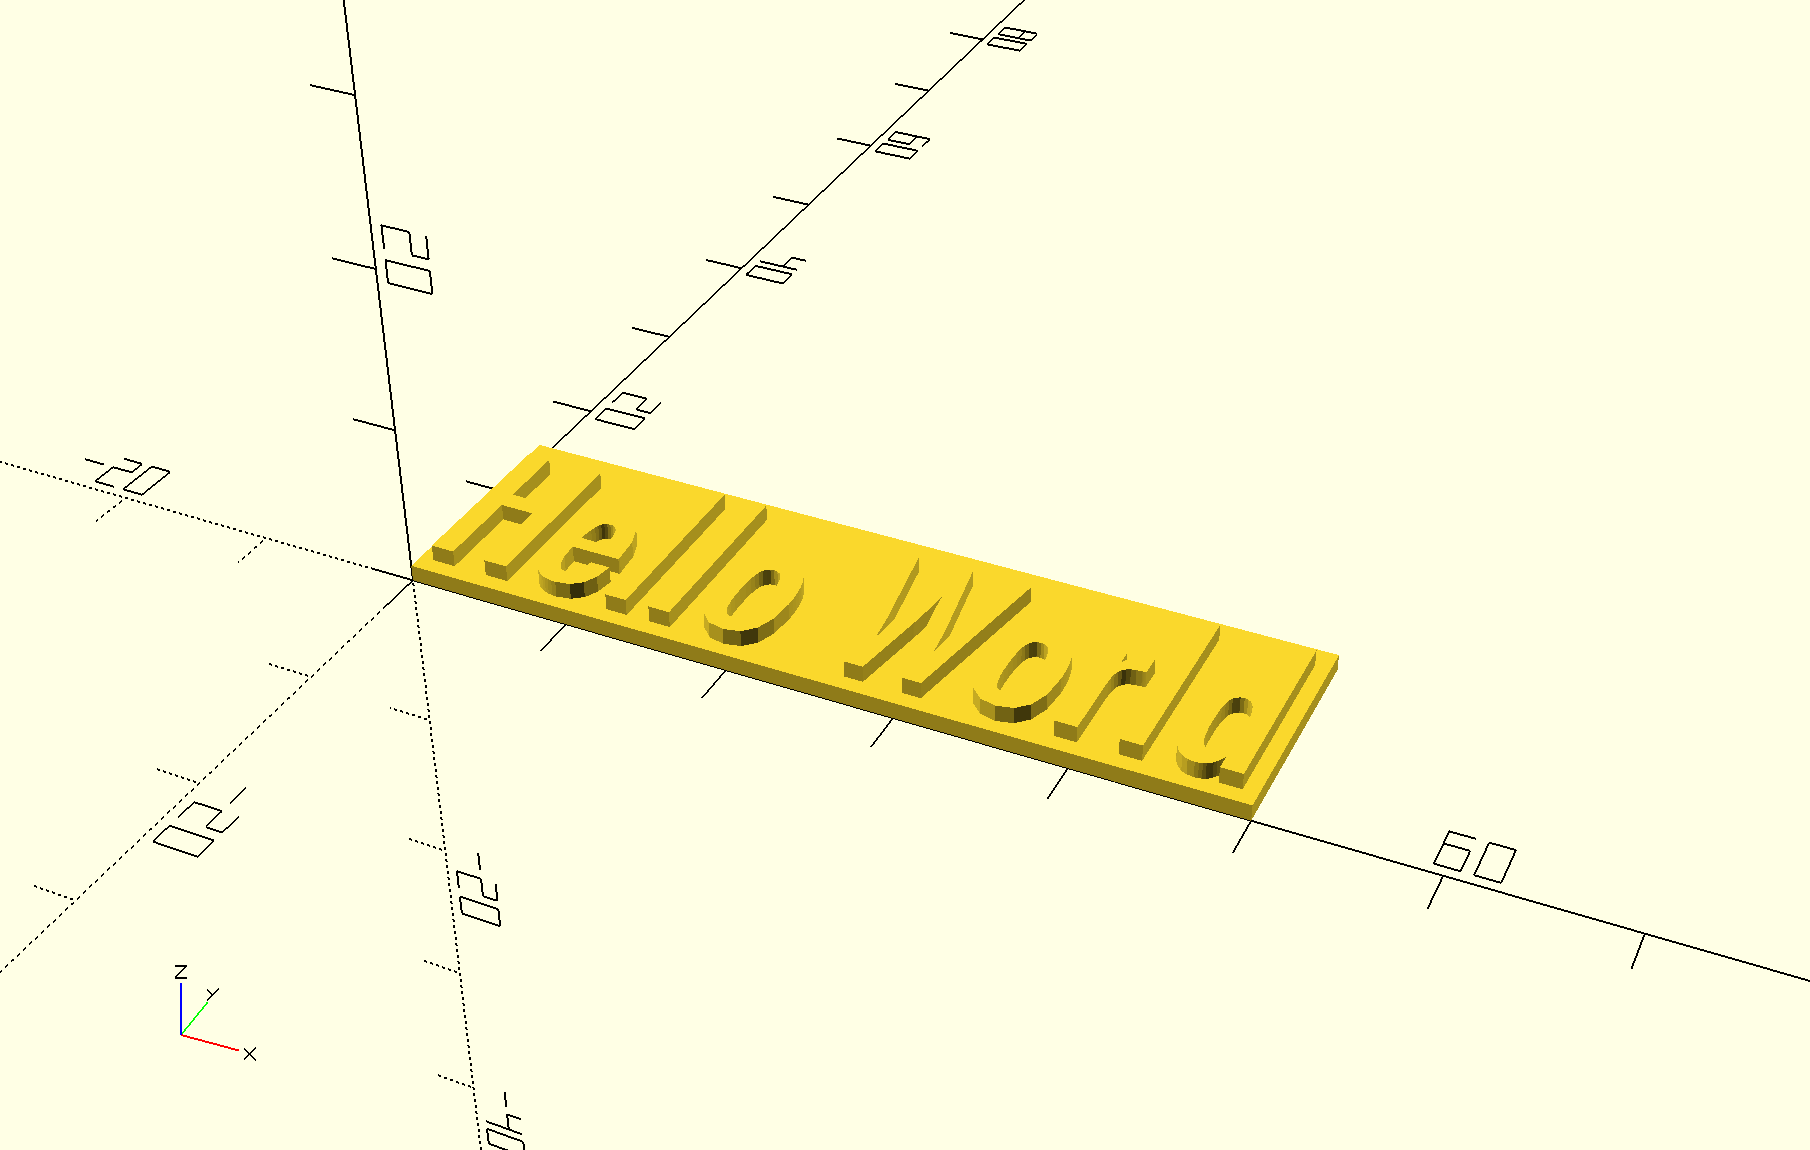 3D Modeled Text Example